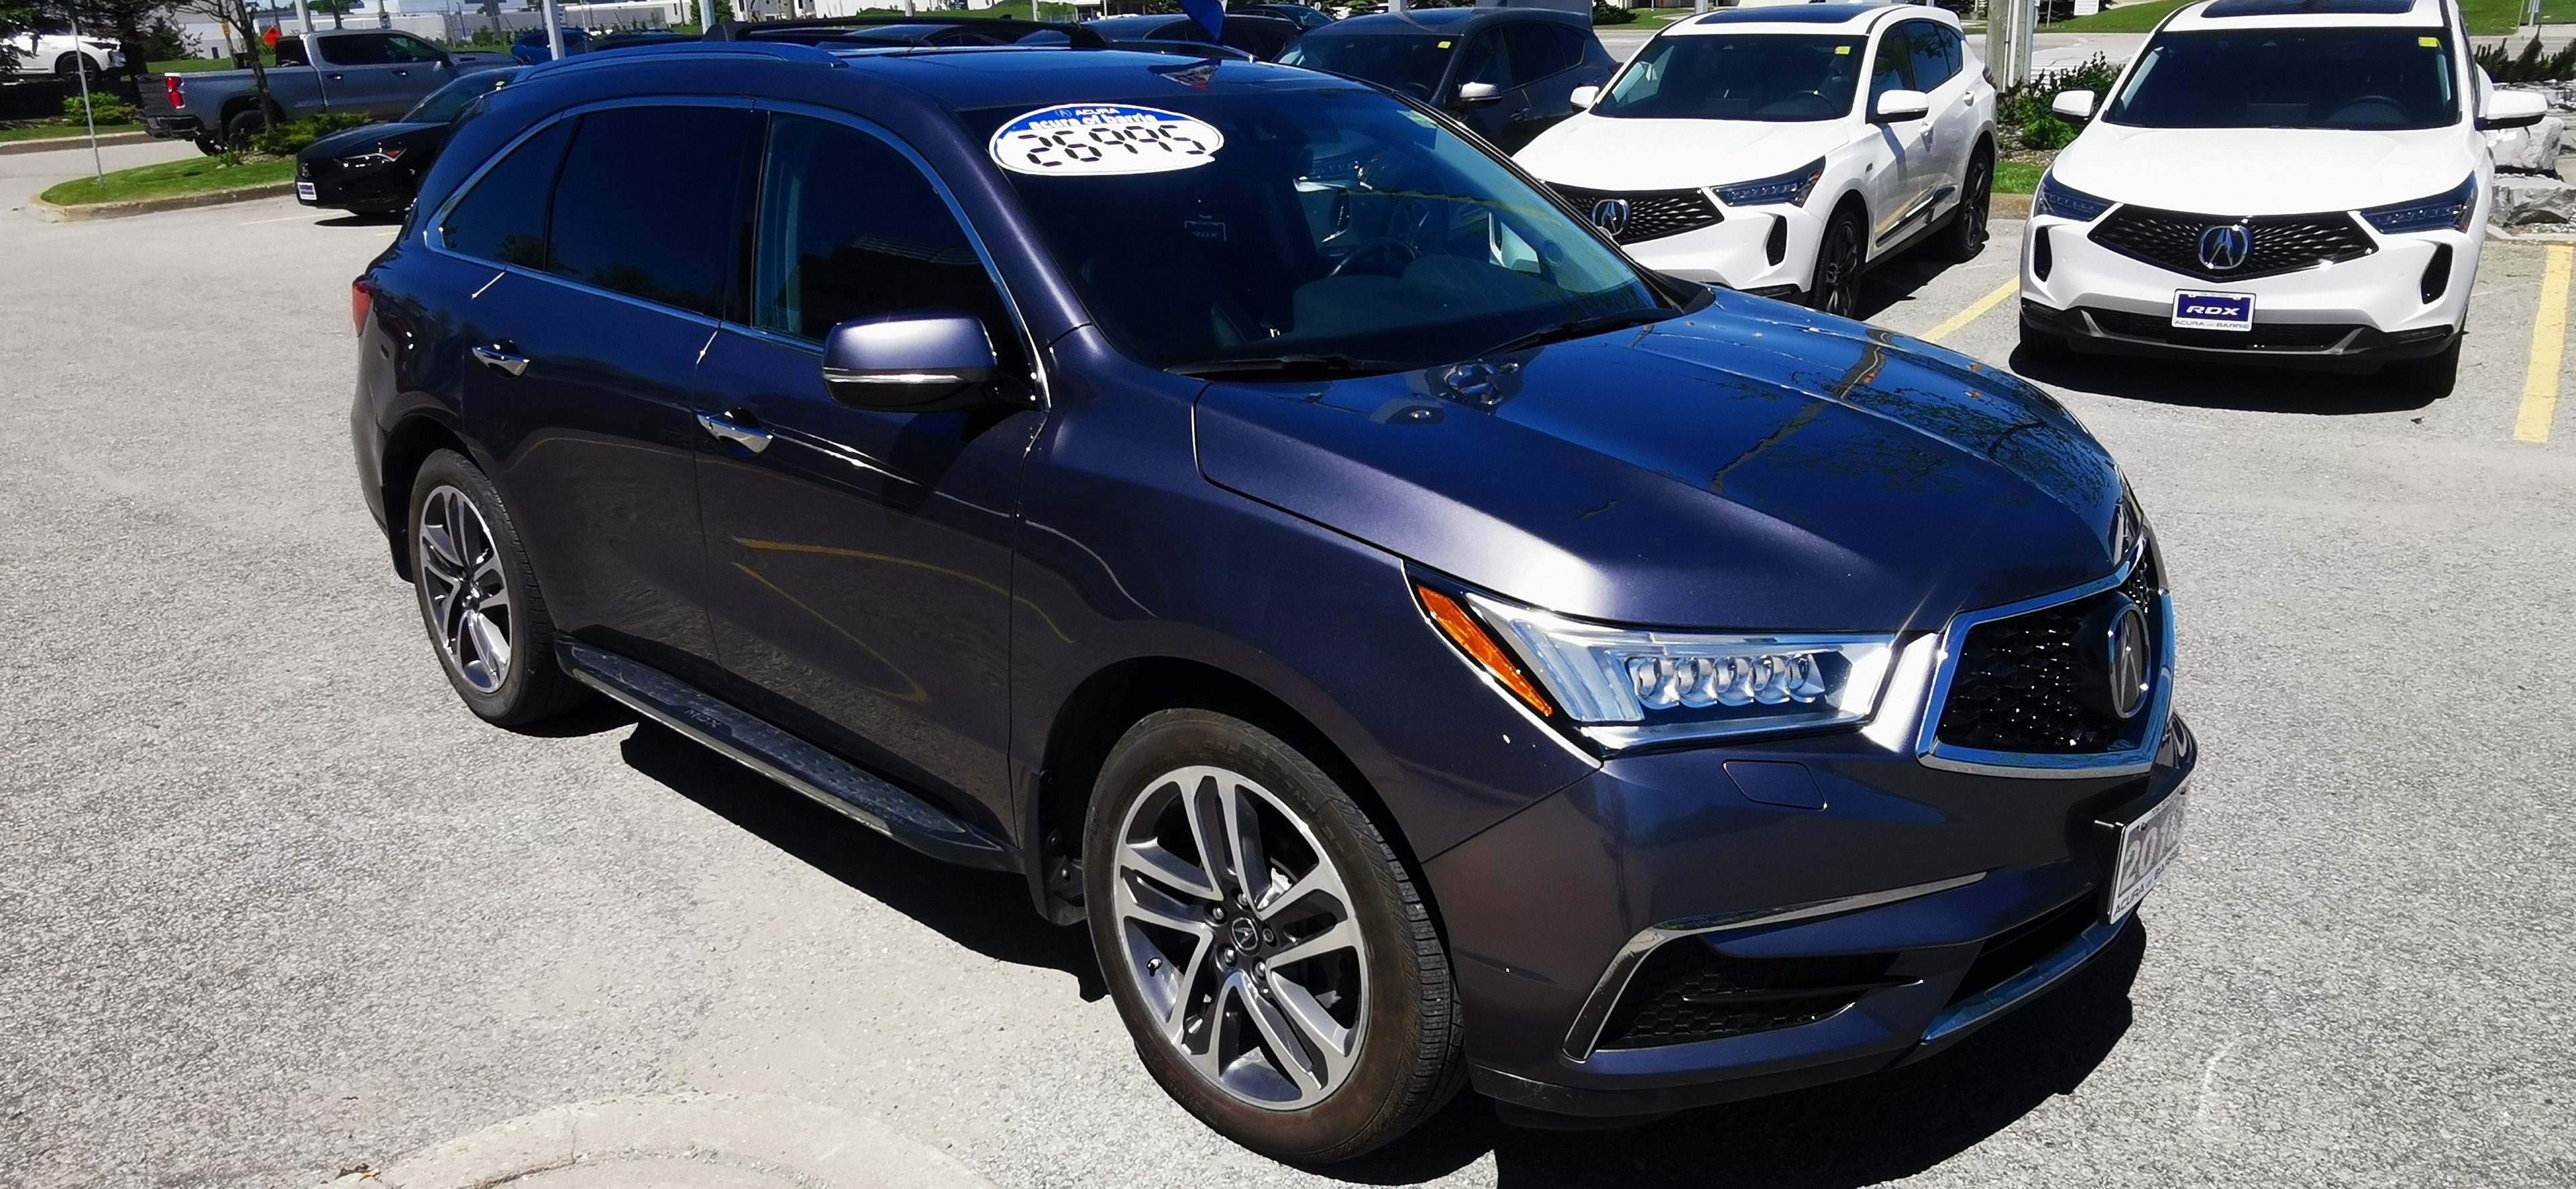 2018 Acura MDX Smoke free, accident free, tow package, +boards!